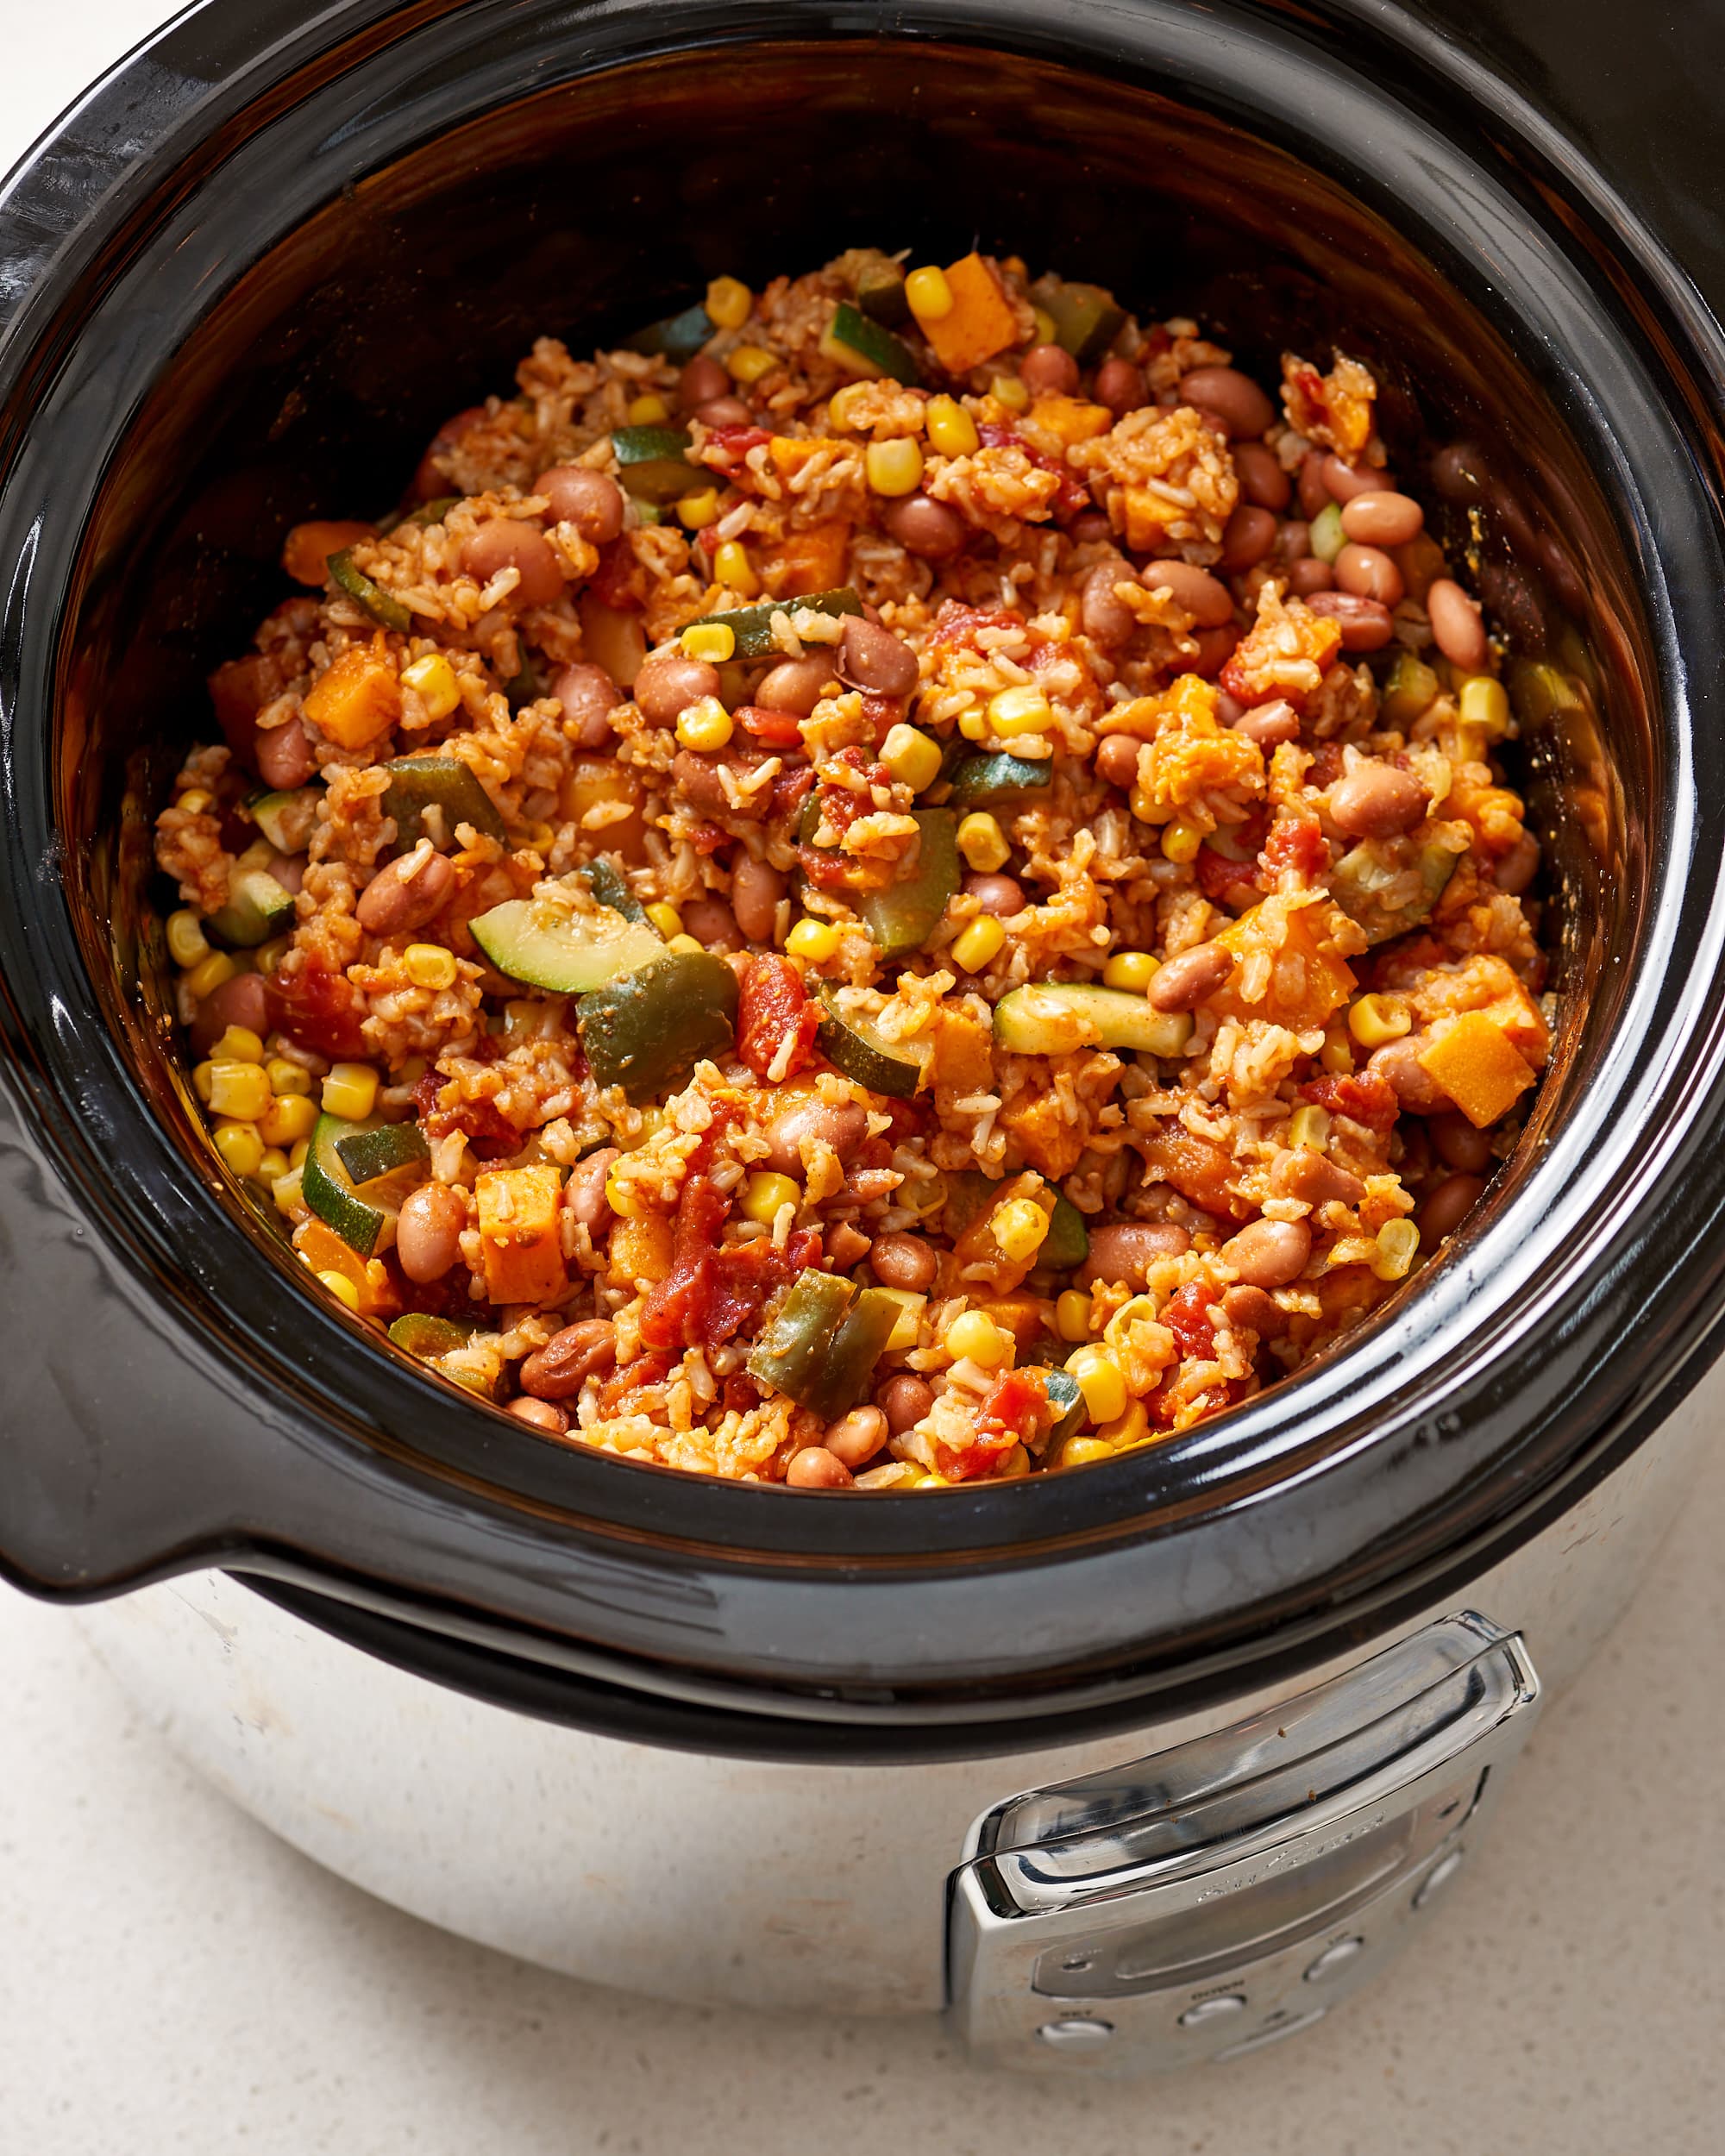 Crockpot Meals for the Week #1